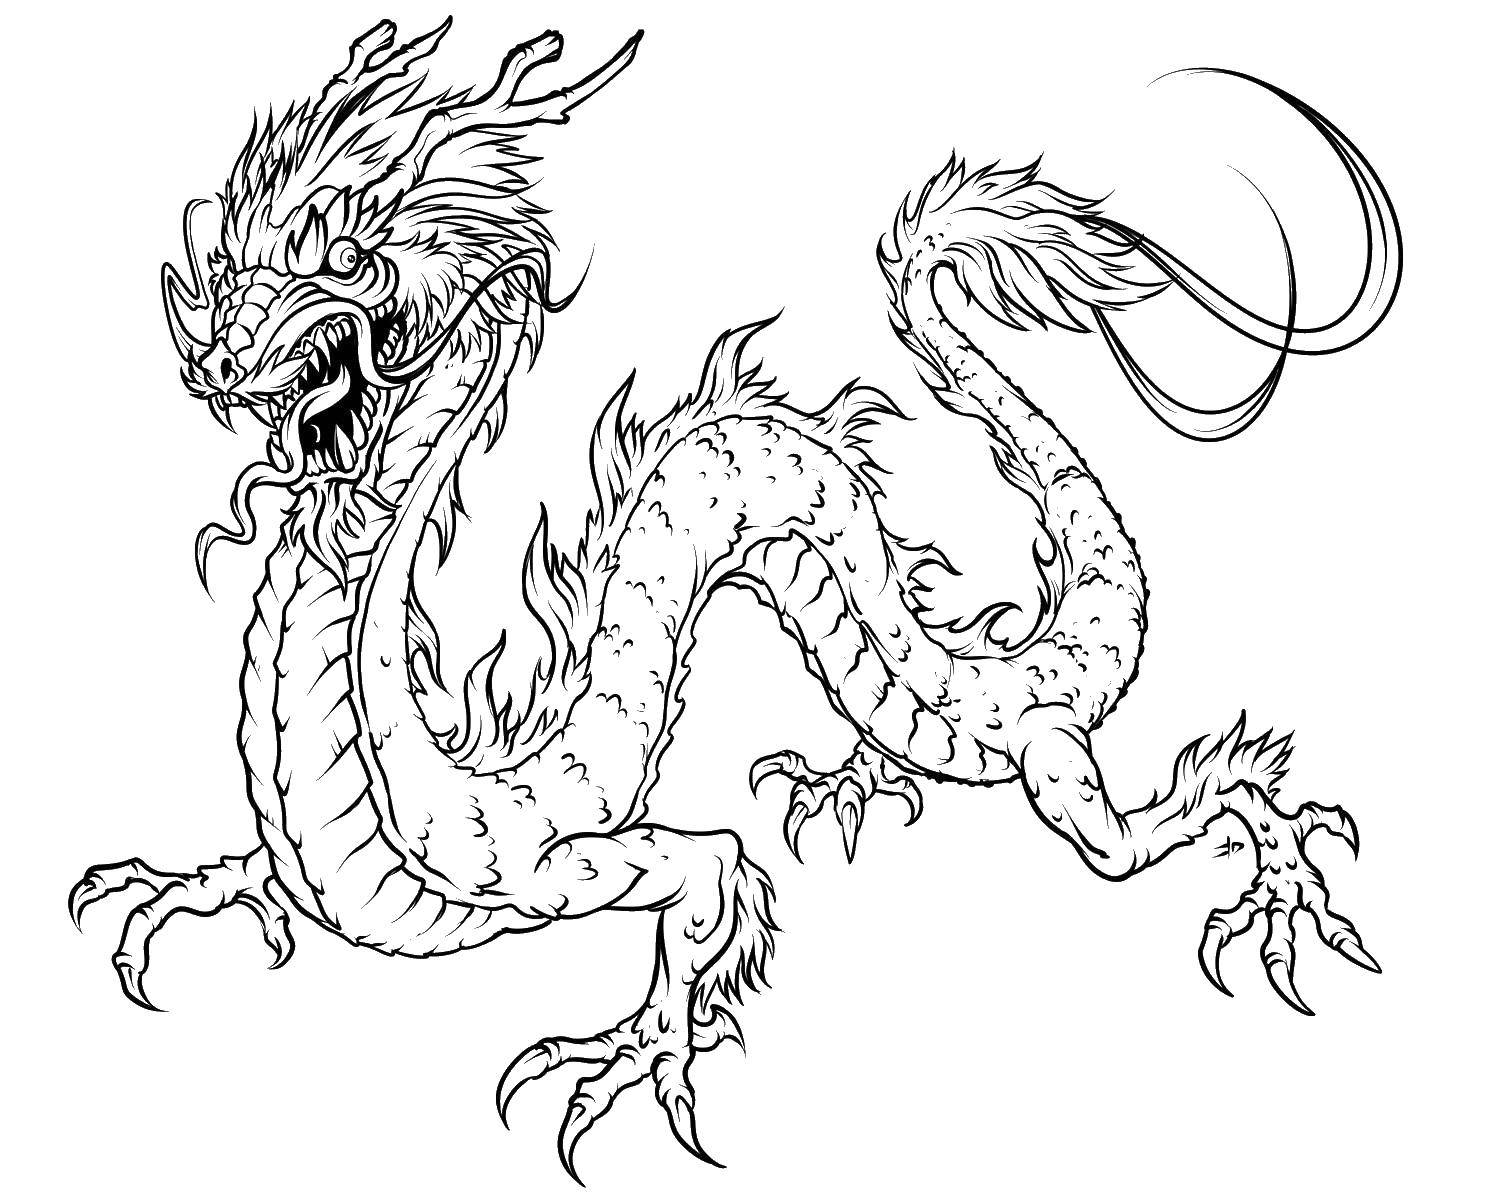 Coloring Dragon. Category Dragons. Tags:  dragon, fire, wings, China.